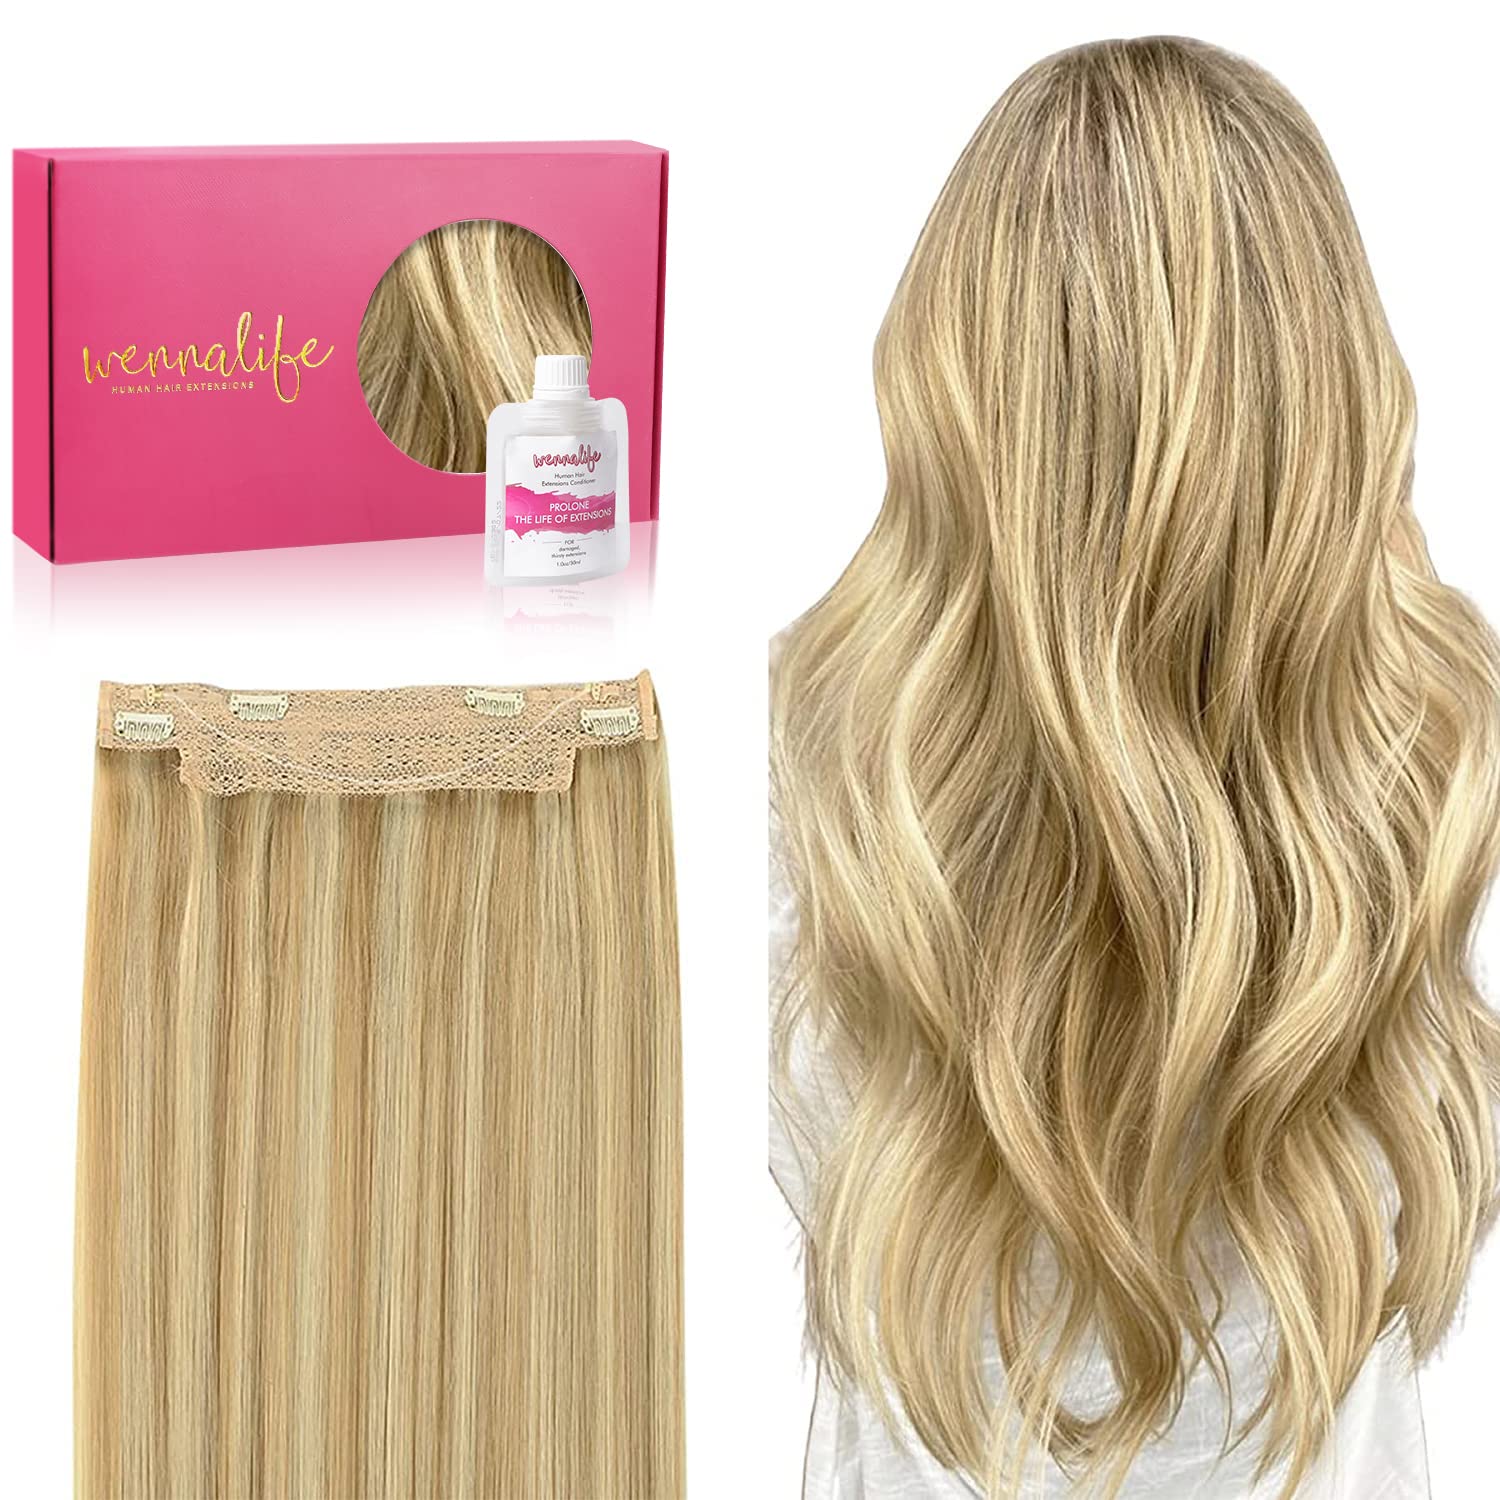  WENNALIFE Seamless Clip In Hair Extensions, 20 Inch